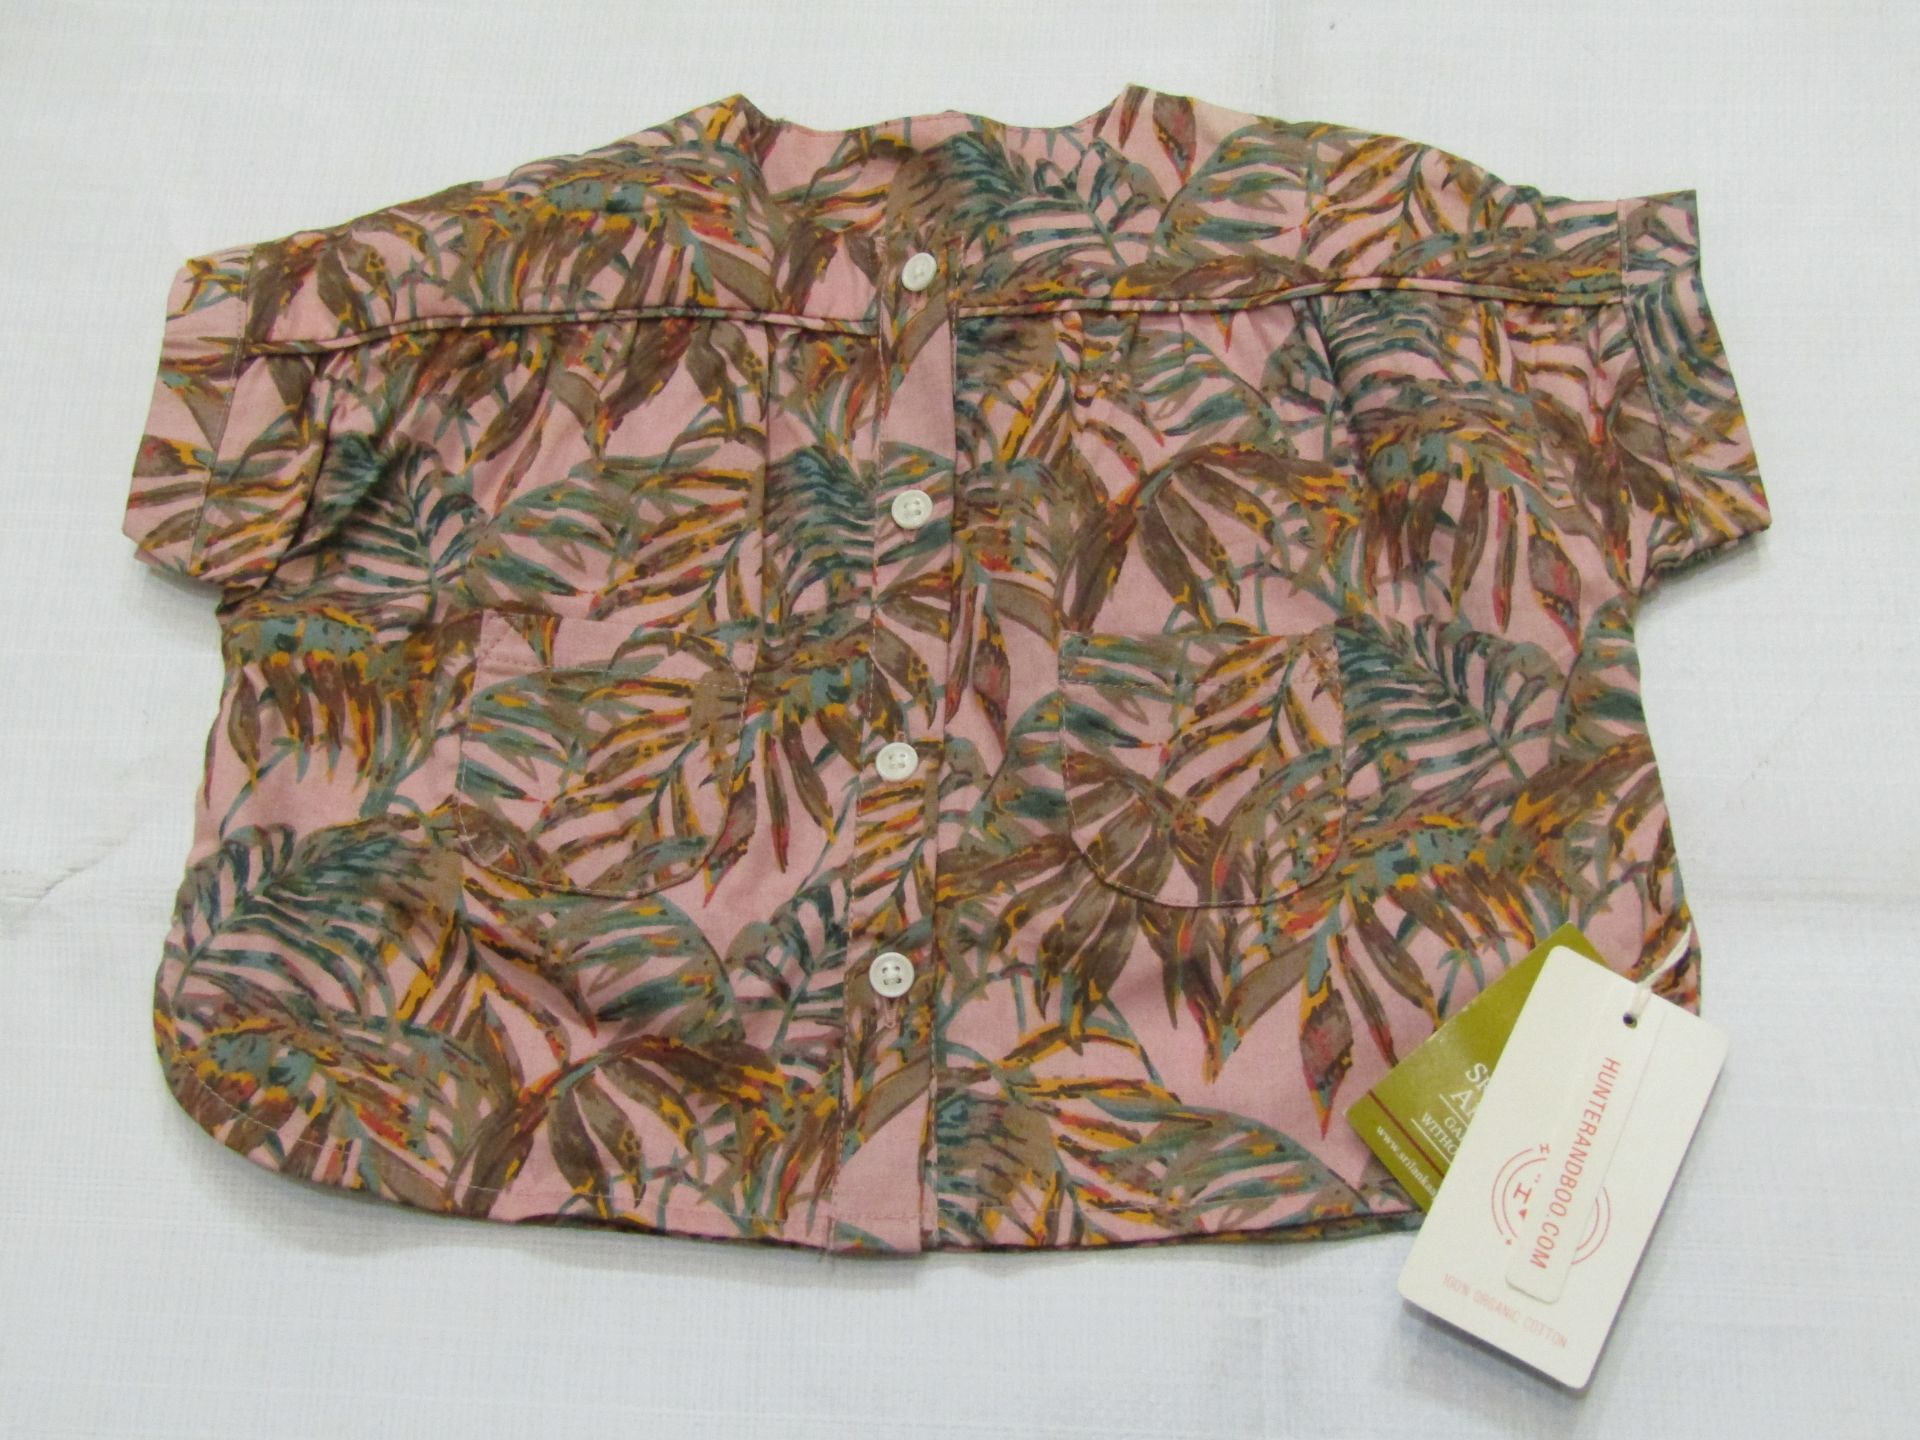 Hunter & Boo Nude Palawan Blouse Aged 6-12 Months New & Packaged RRP £21 - Image 2 of 2